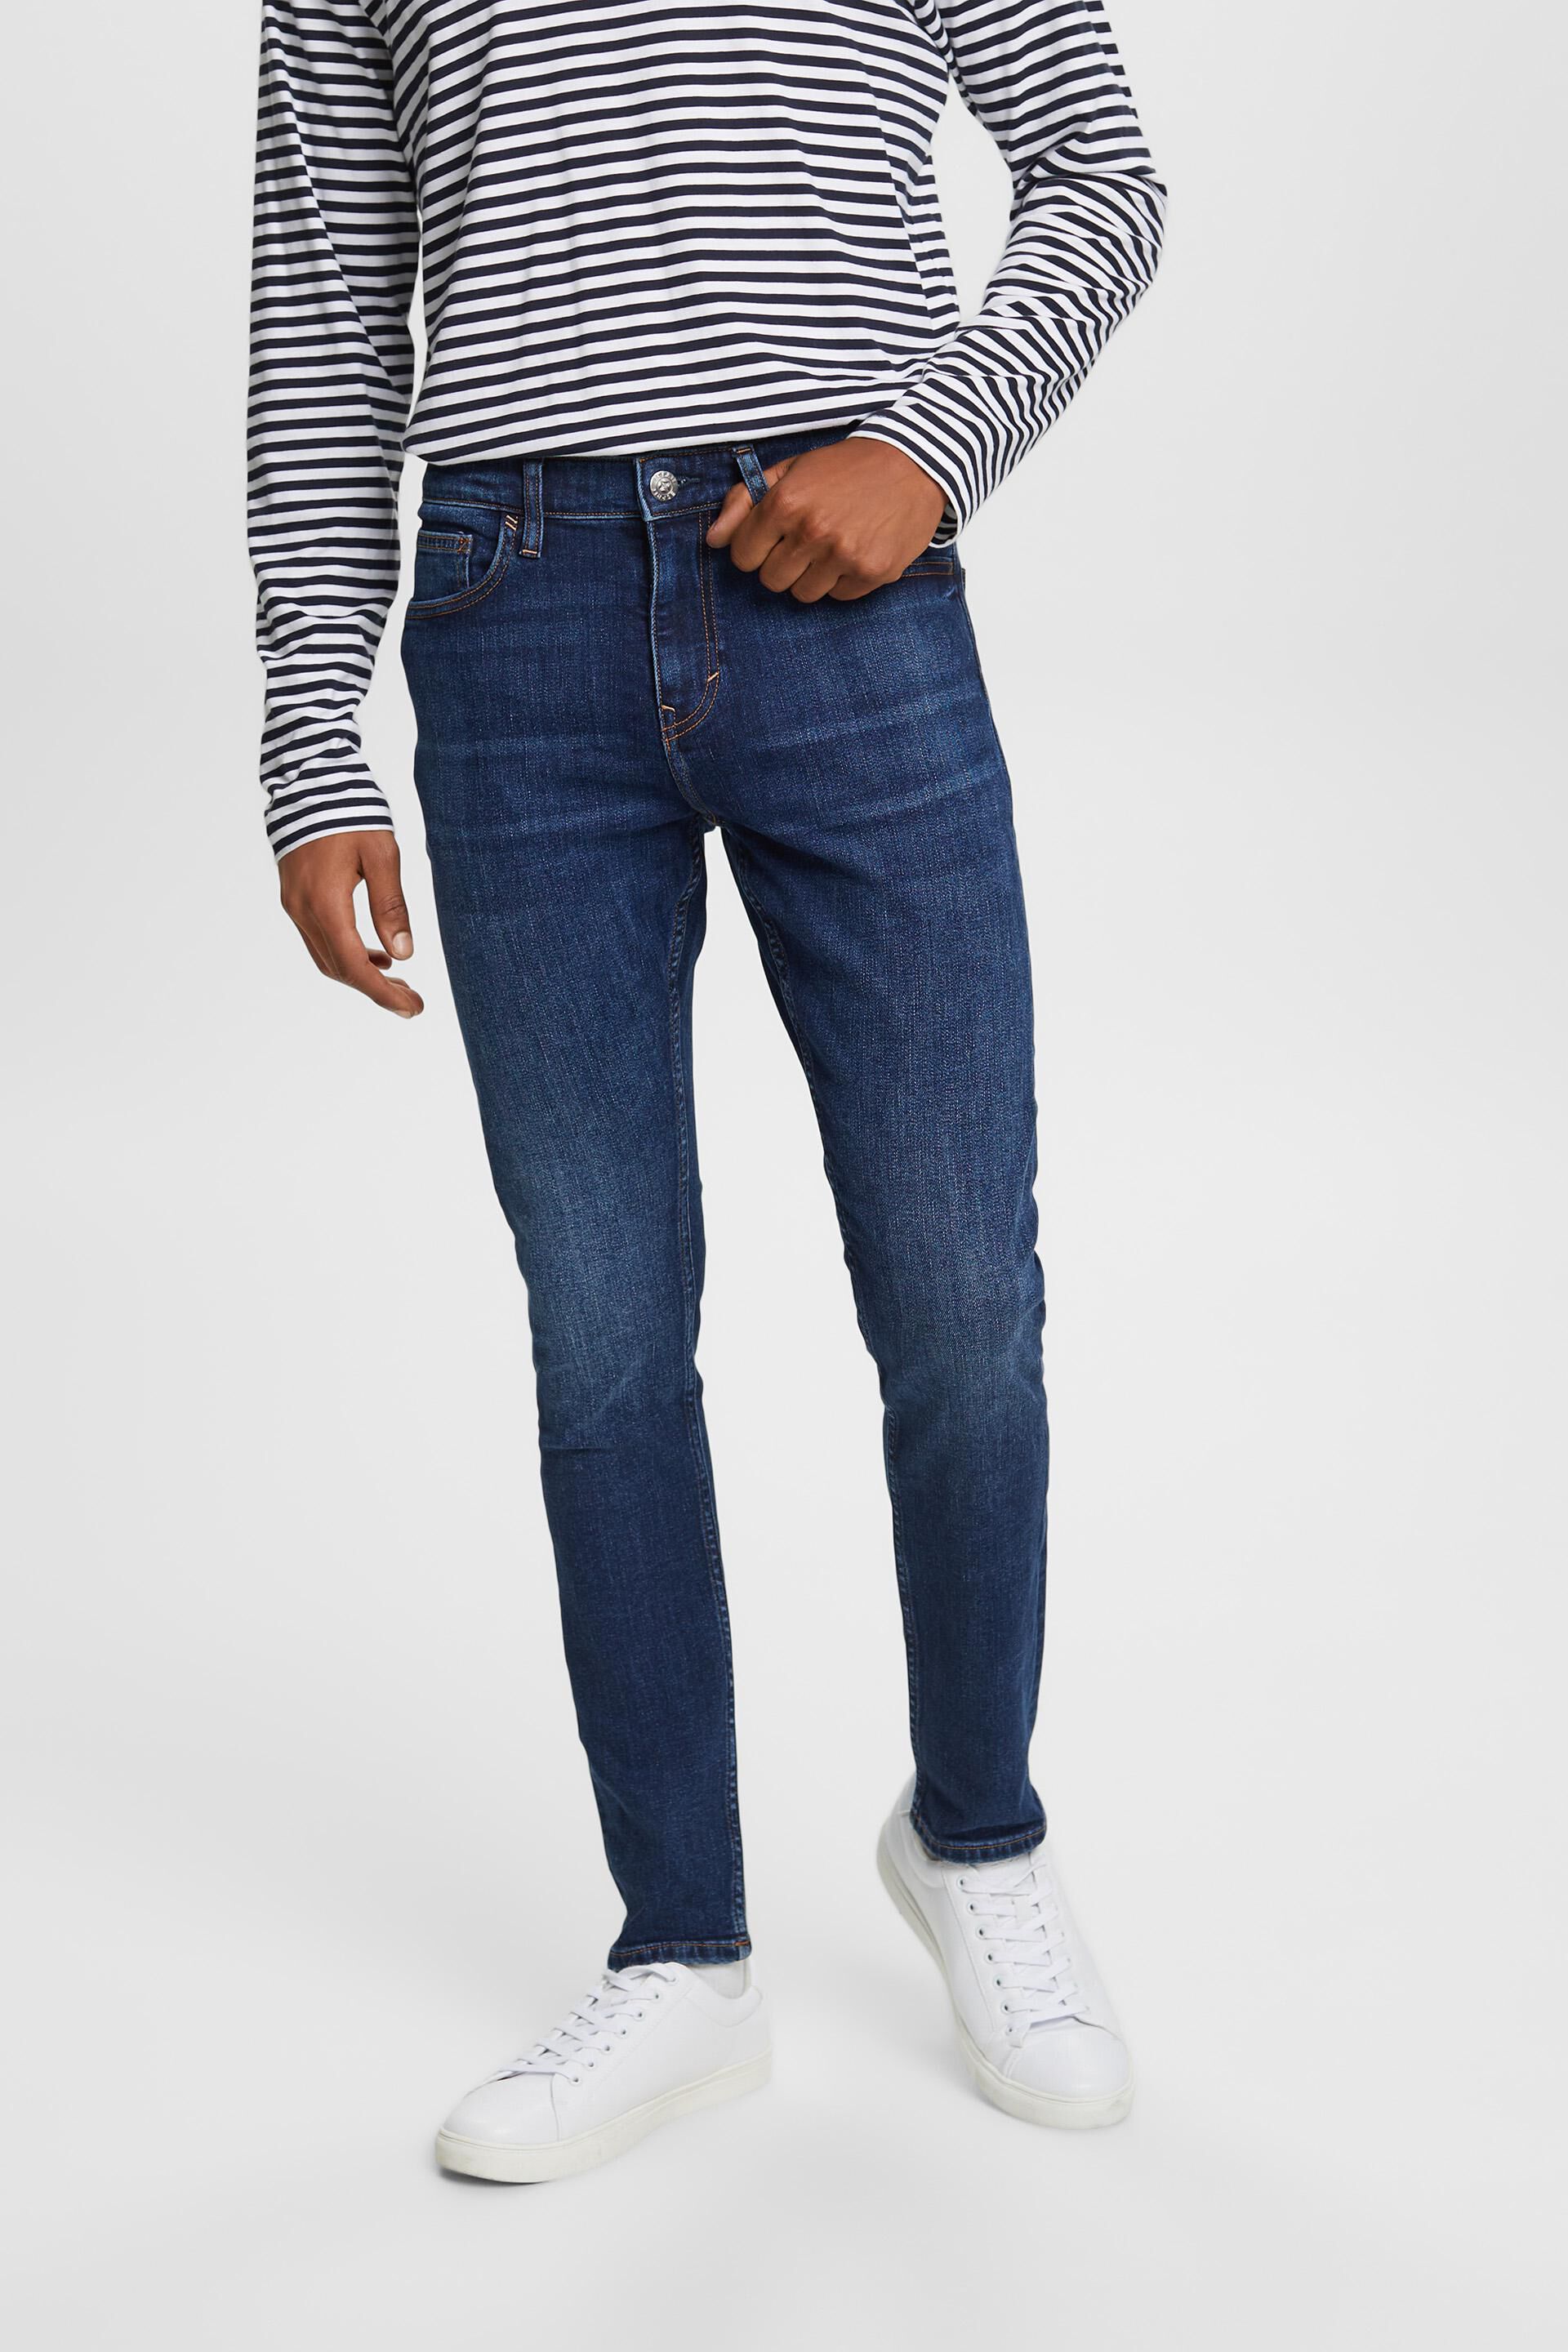 Esprit recycled jeans, cotton Skinny stretch